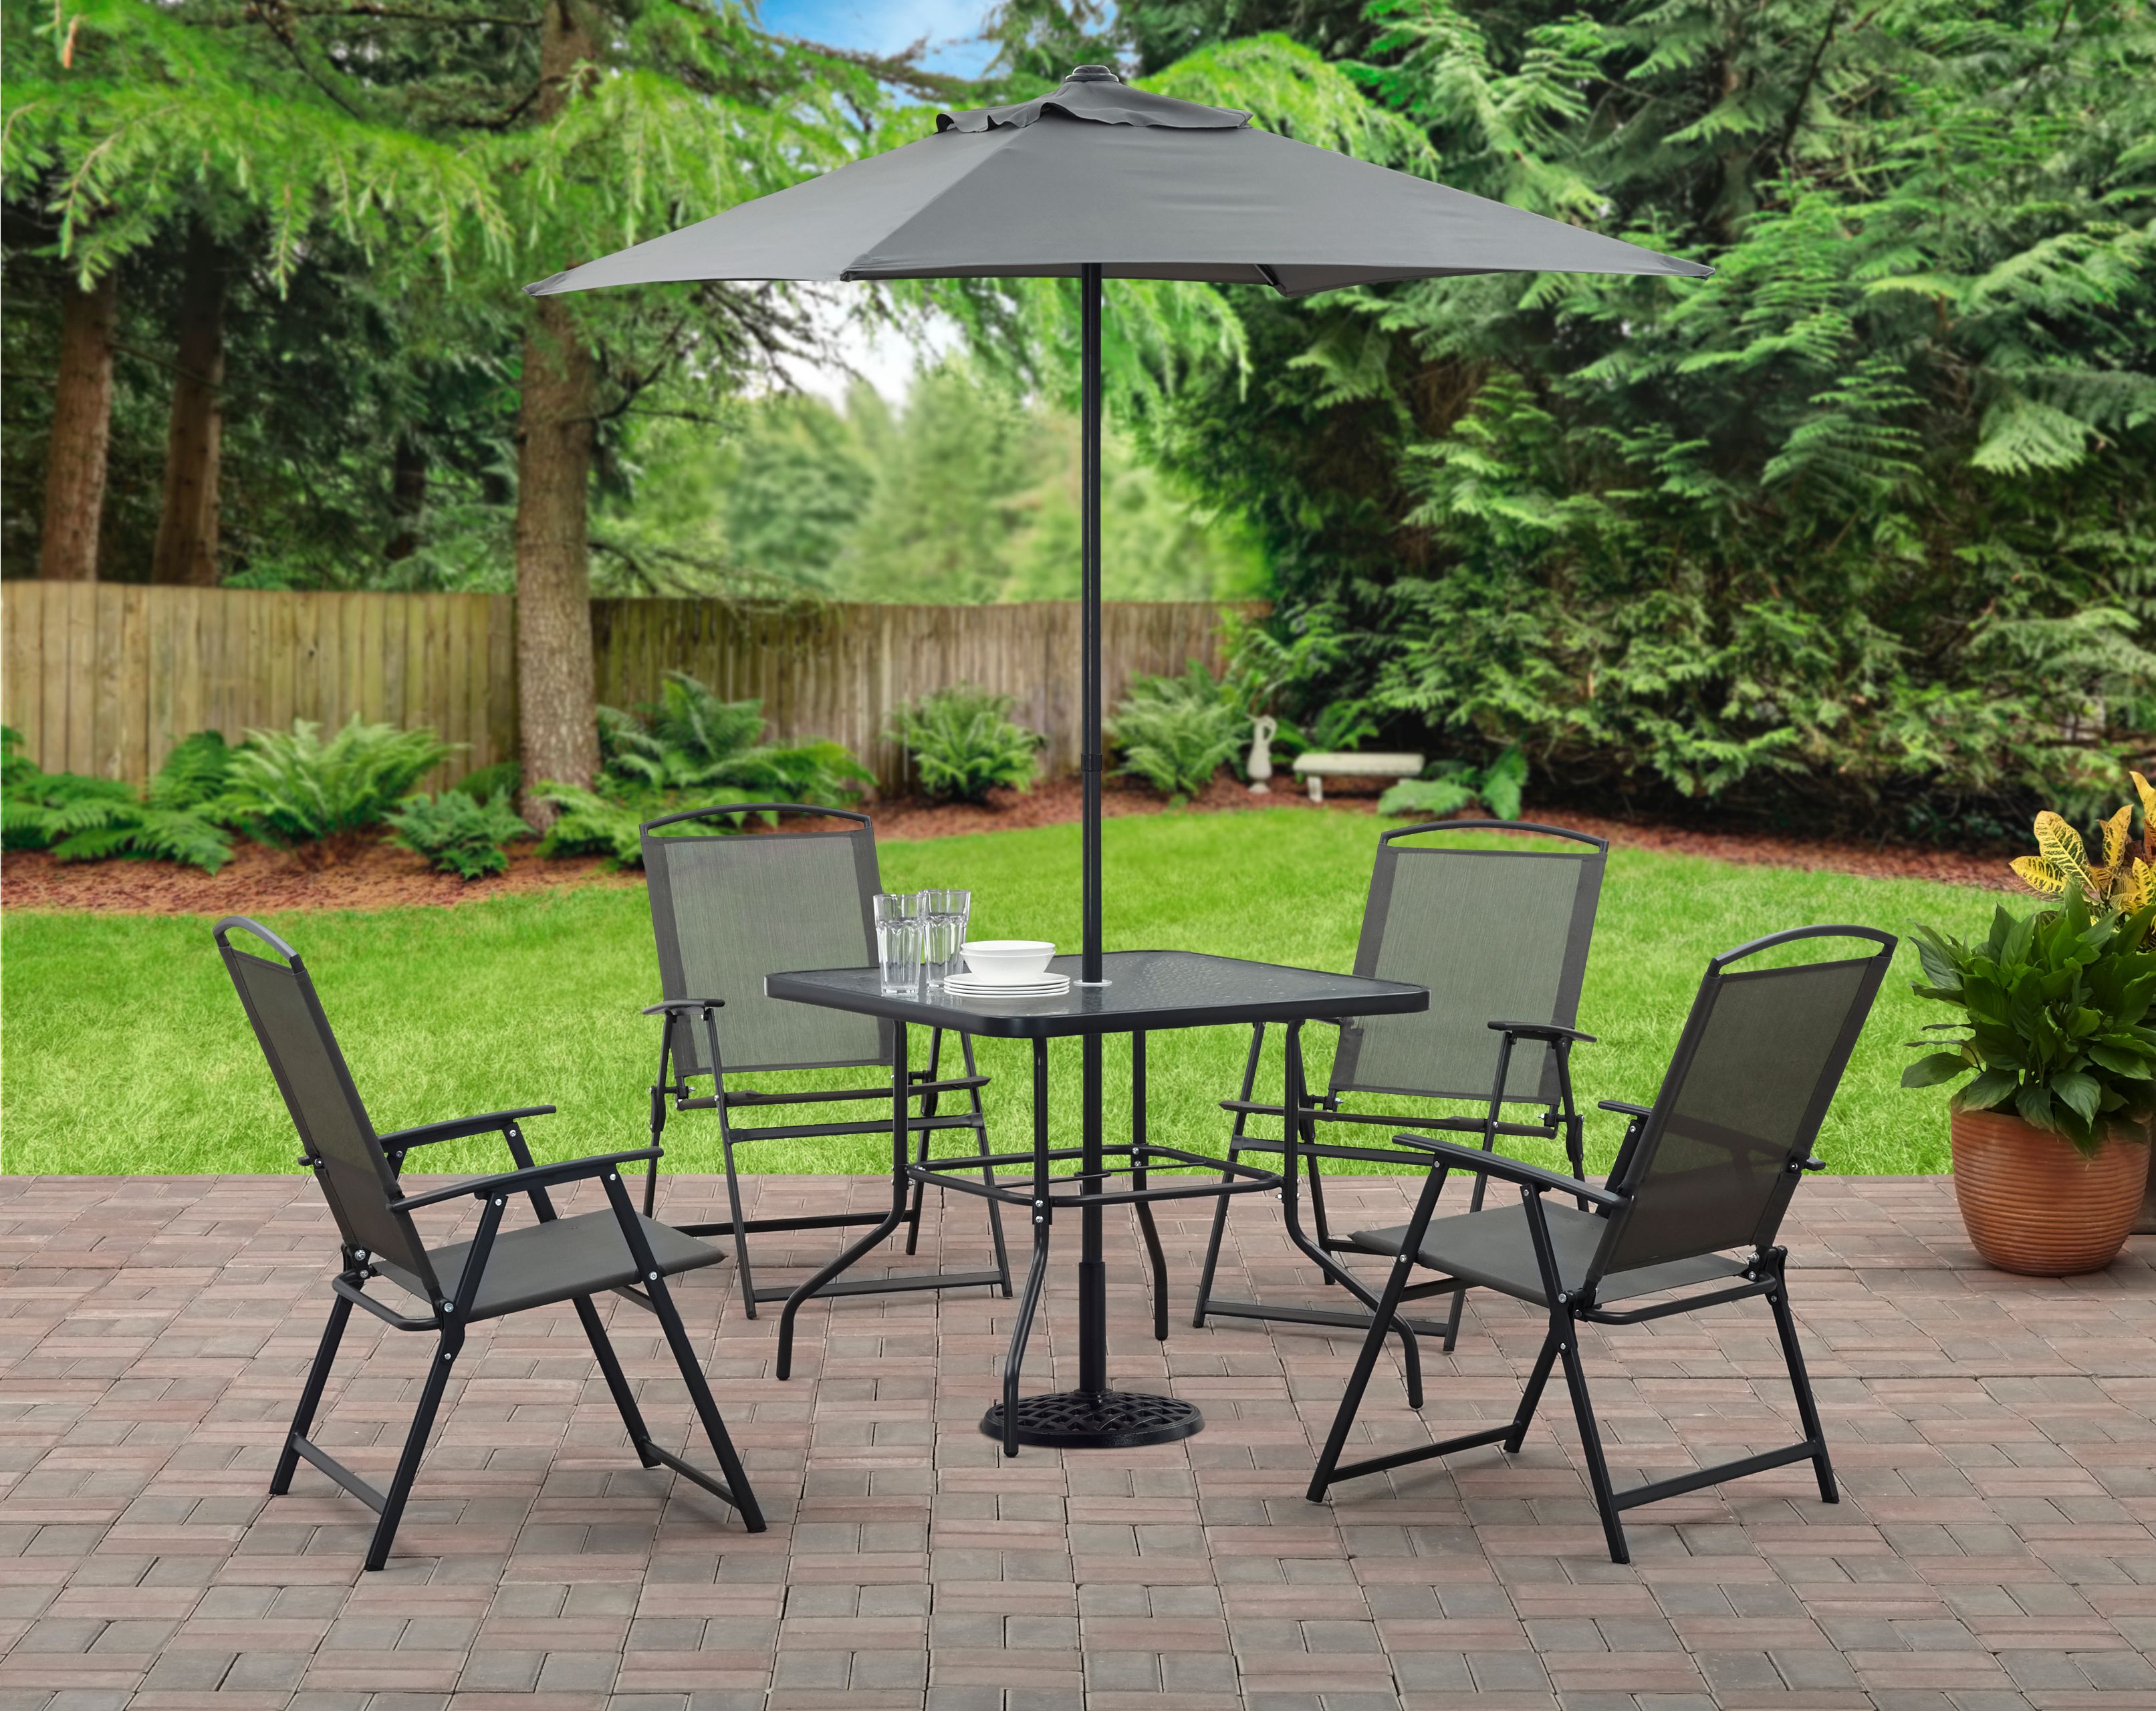 Mainstays Albany Lane 6-Piece Outdoor Patio Dining Set, Gray/Black - image 1 of 11